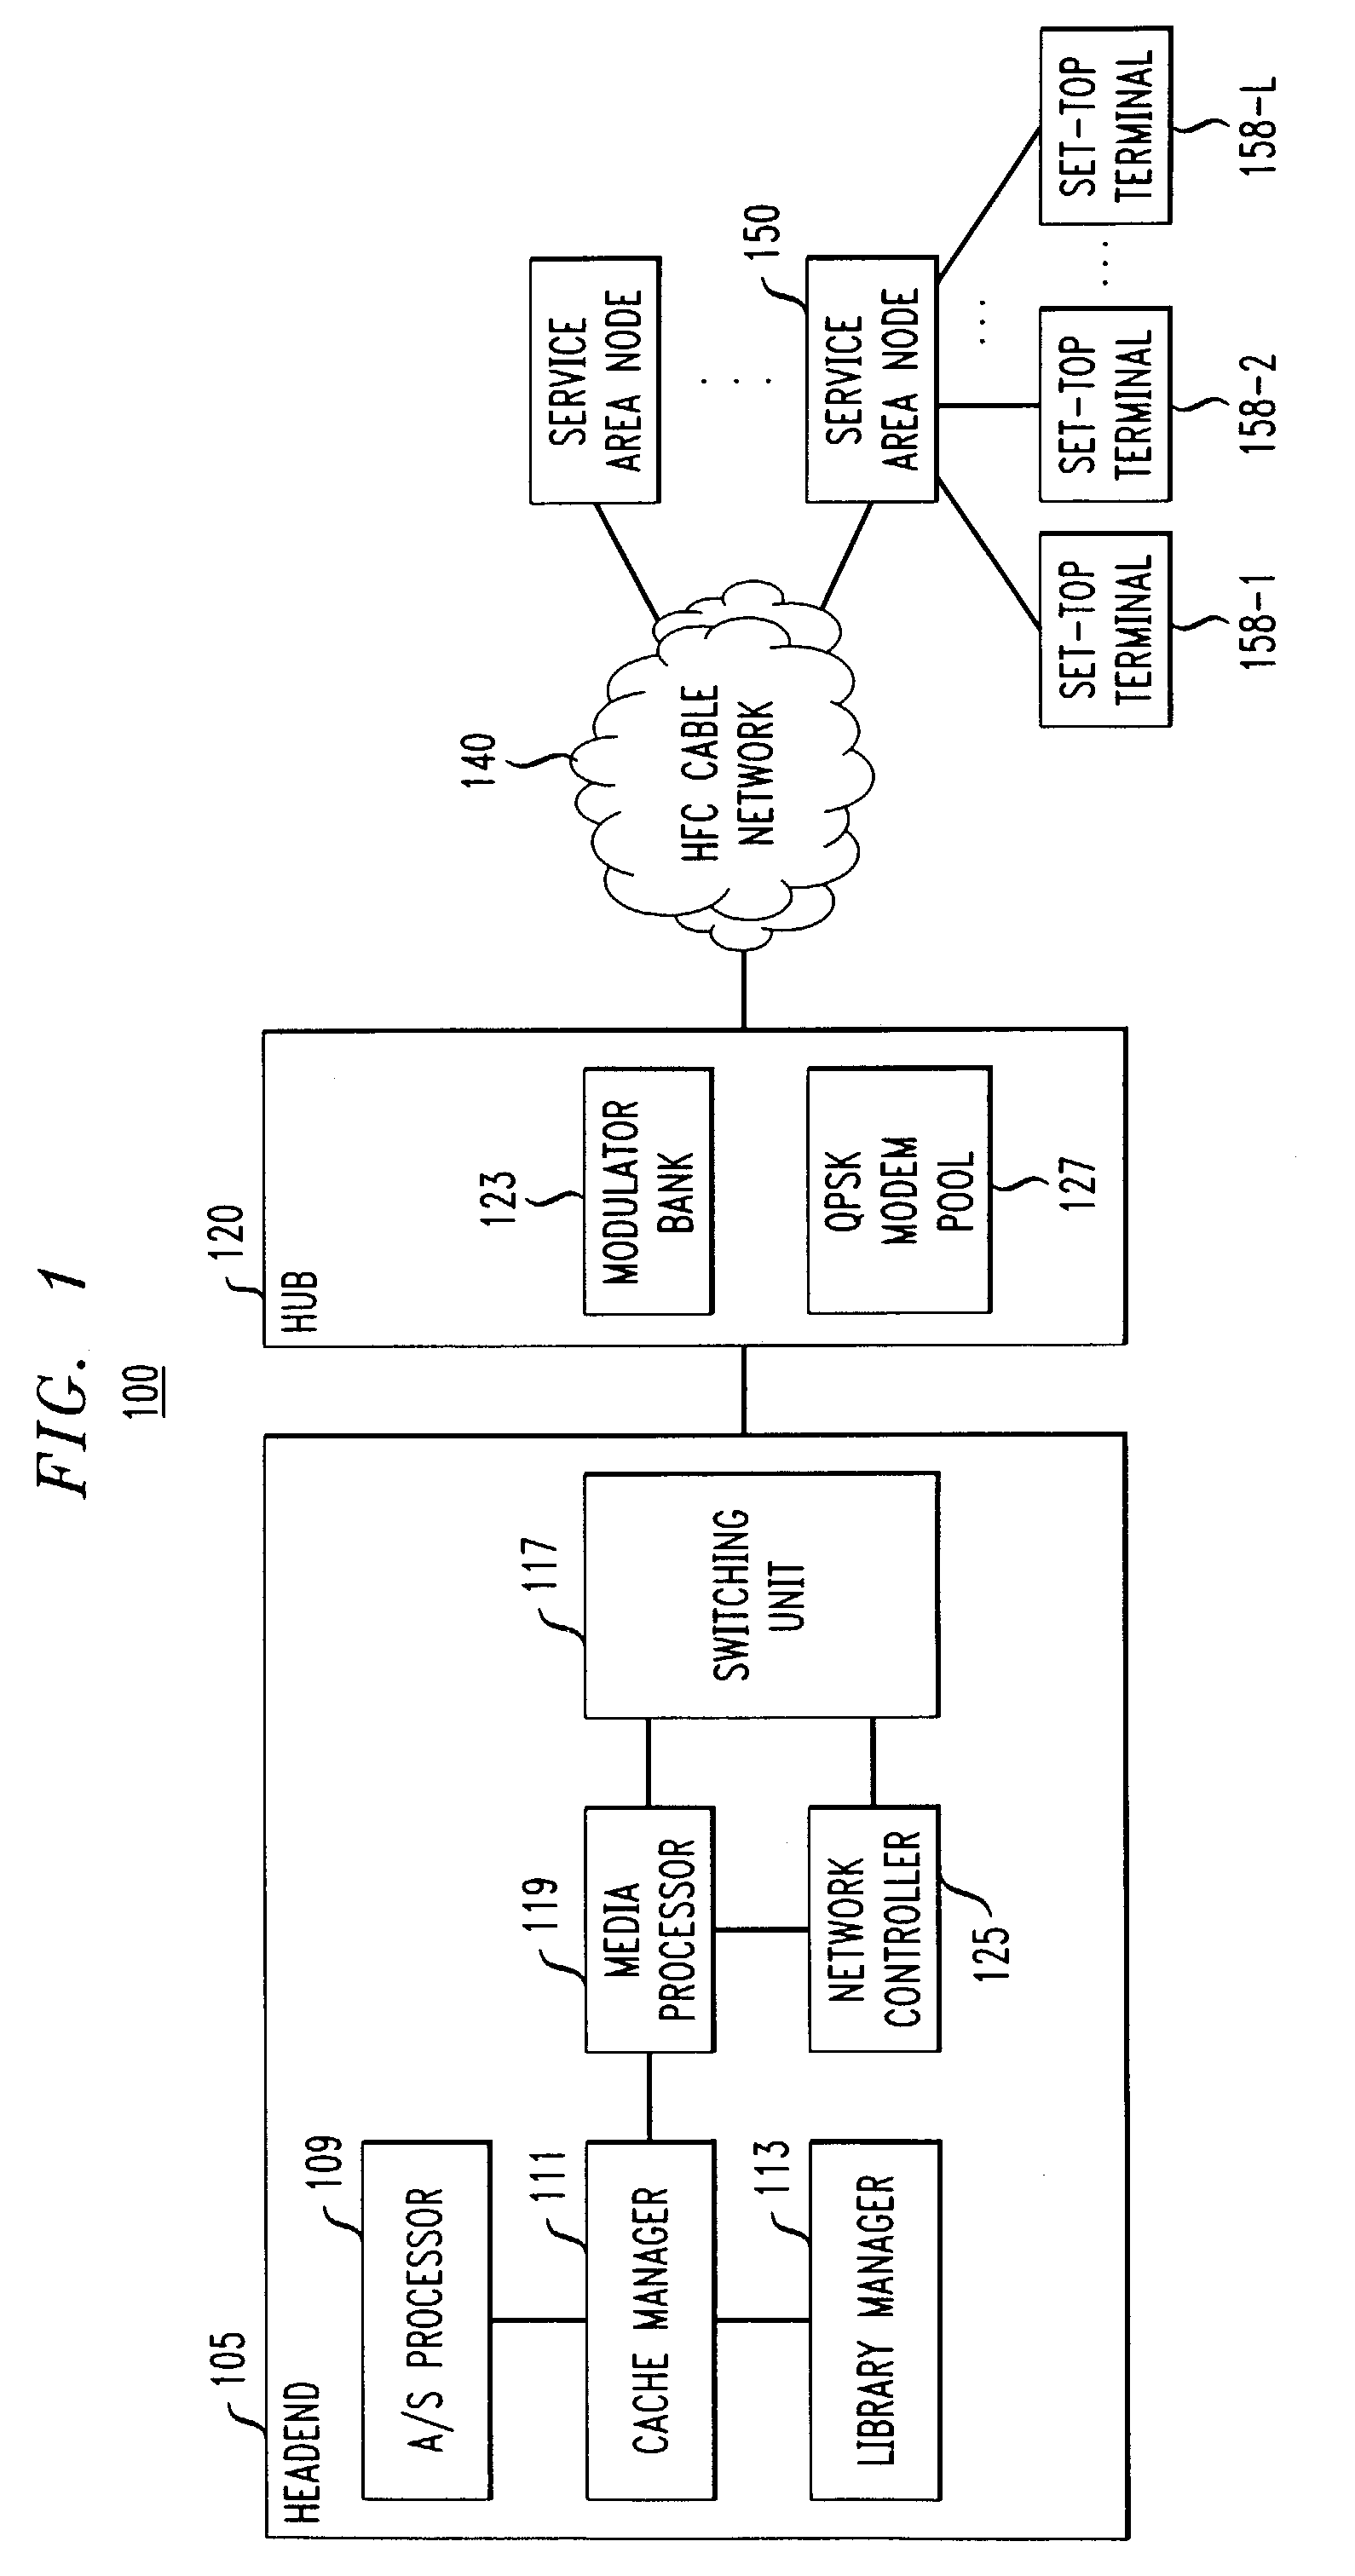 Program guide and reservation system for network based digital information and entertainment storage and delivery system